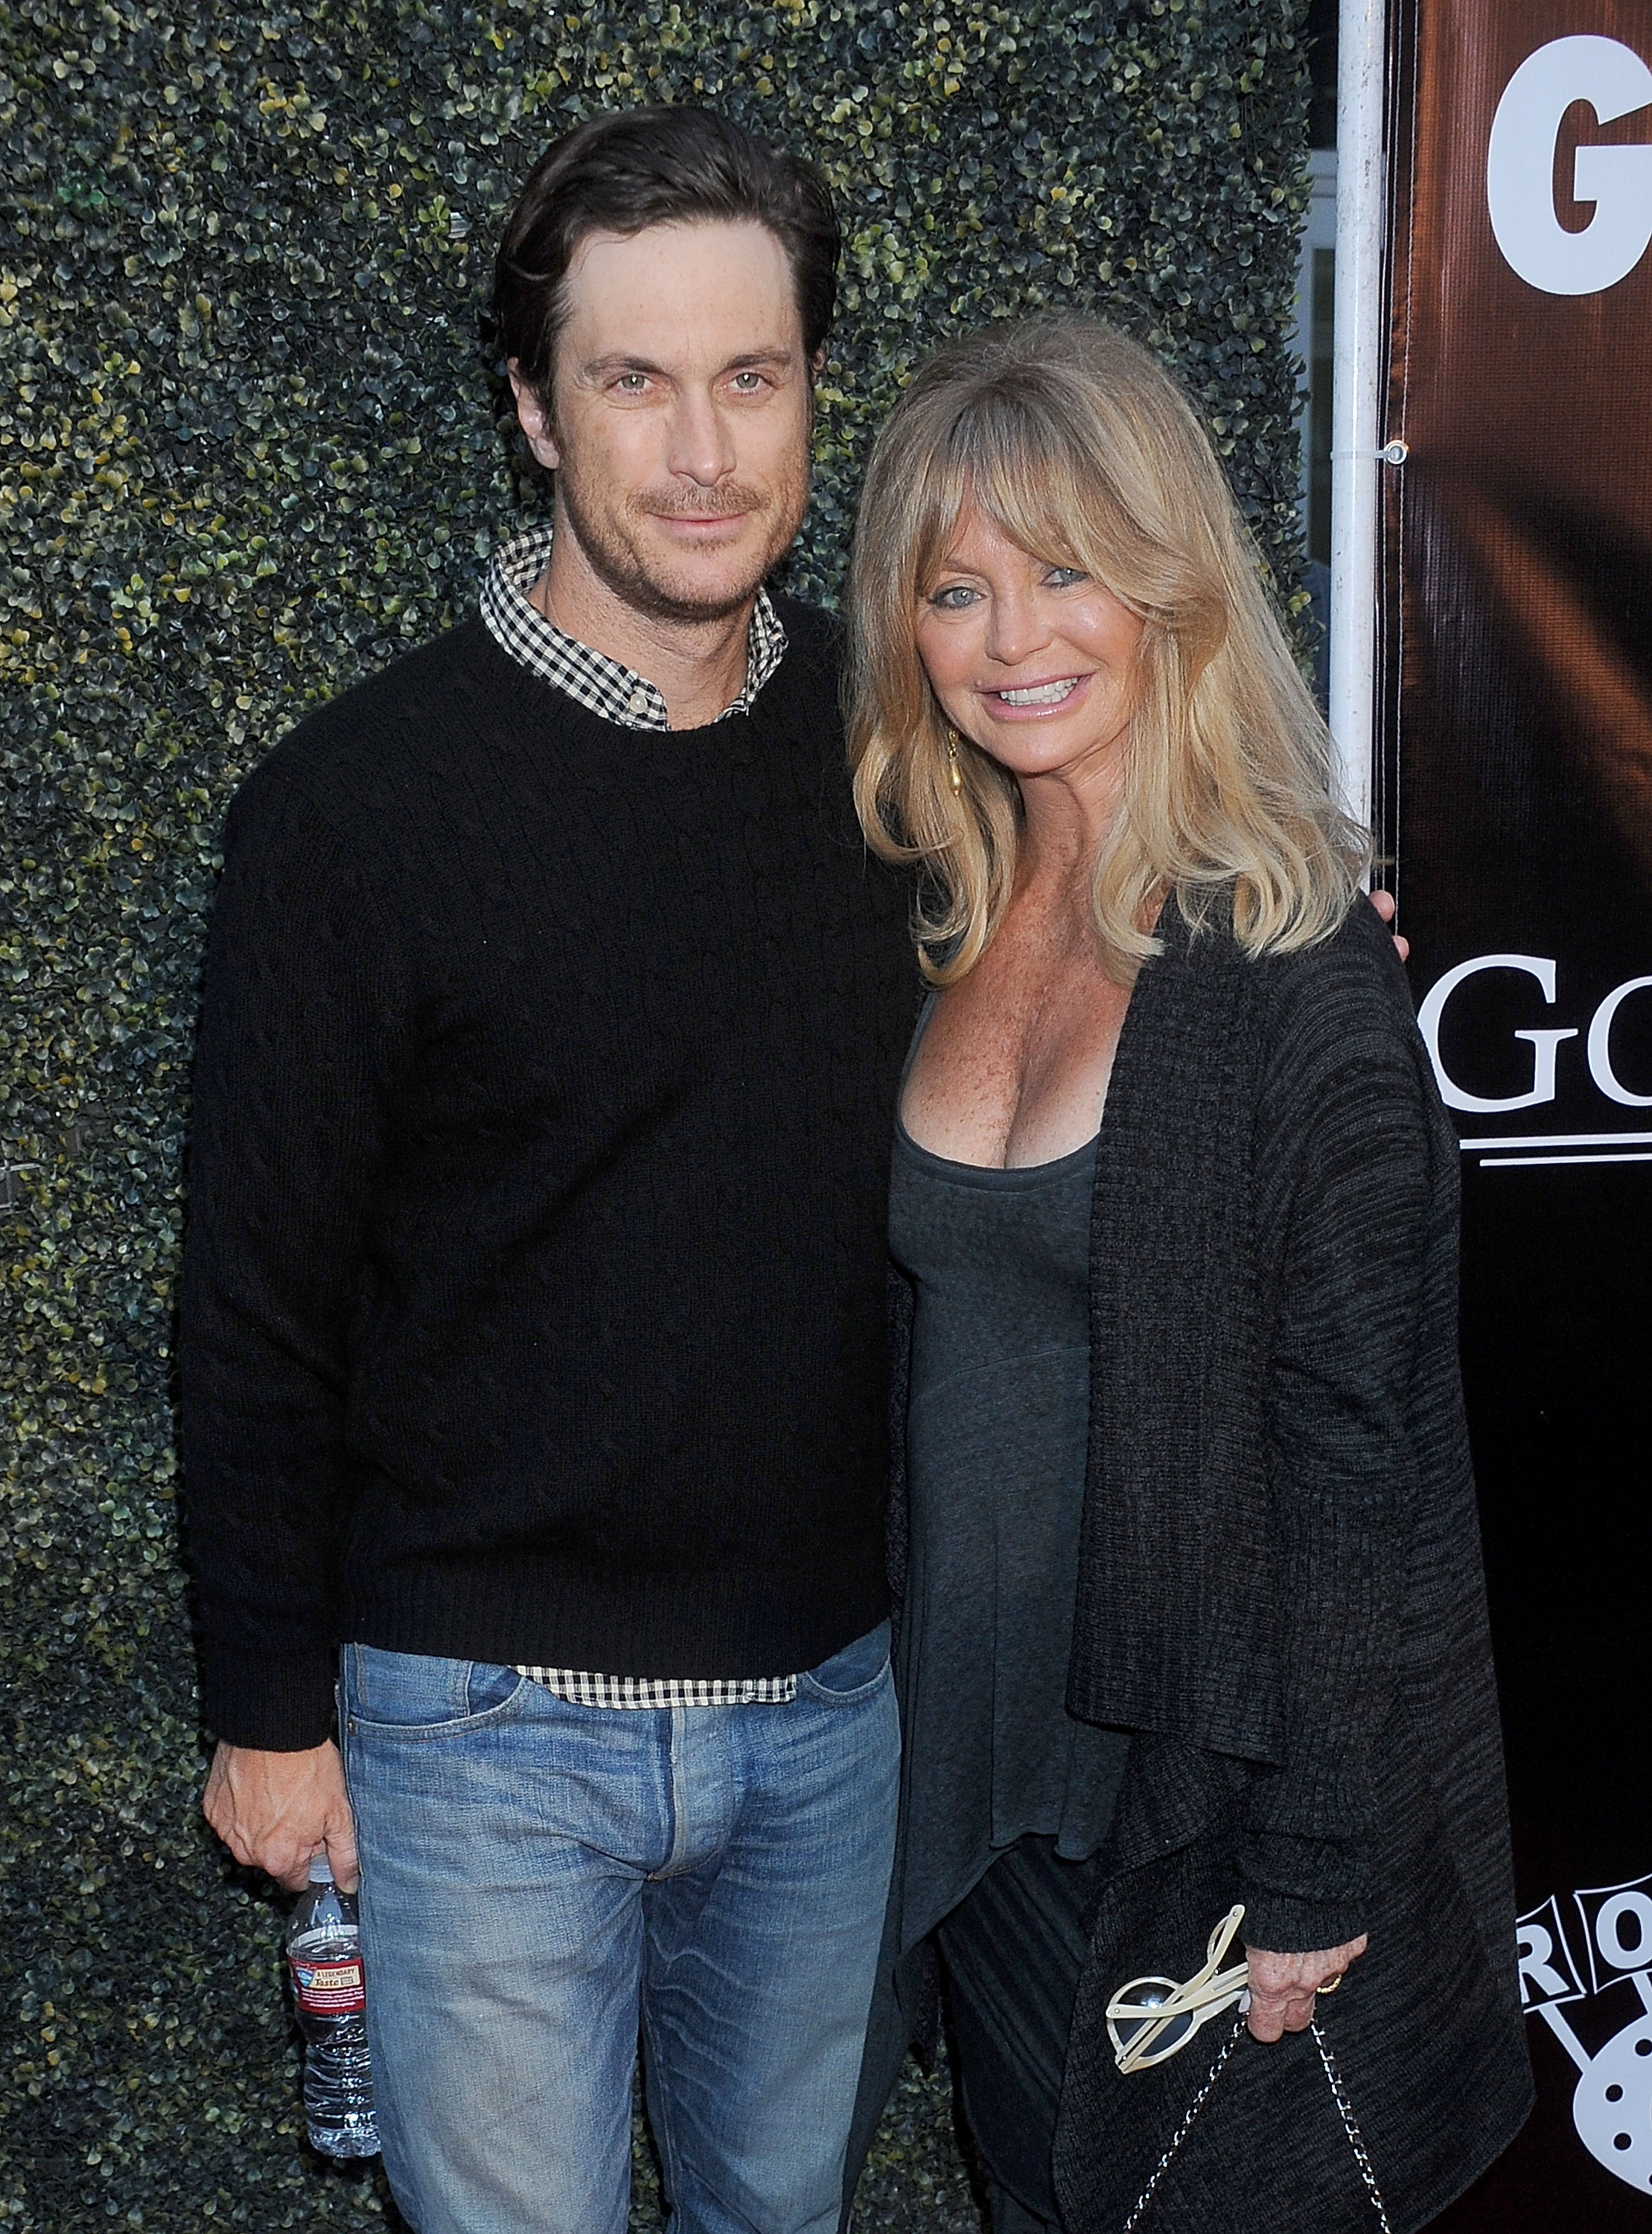 Goldie Hawn and son Oliver Hudson at the Los Angeles premiere of Where Hope Grows at ArcLight Cinemas on May 4, 2015, in Hollywood, California